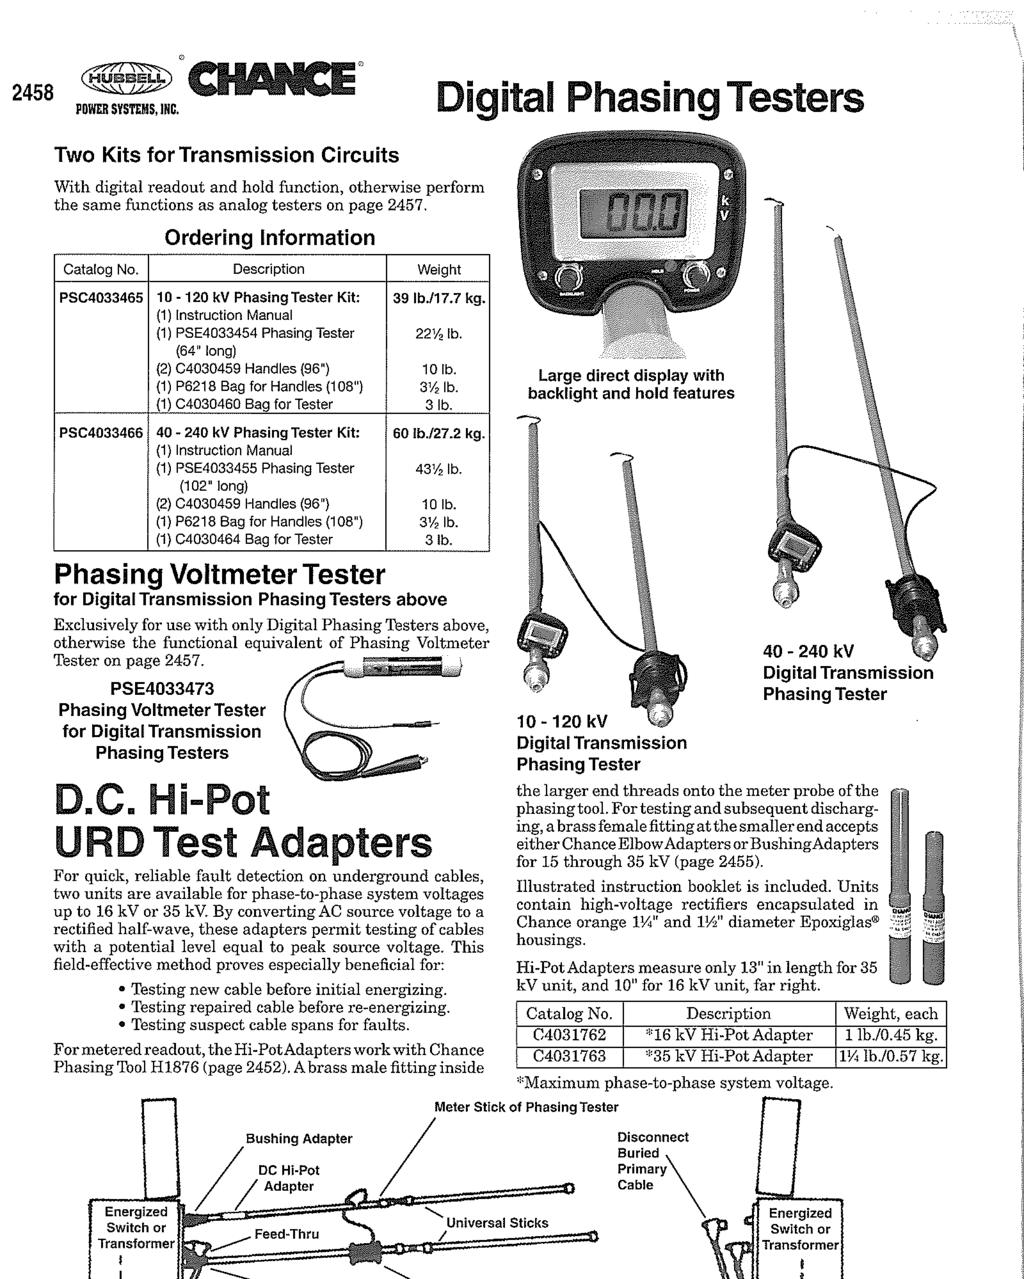 -o,58 VOWER SYSTEBS, INC. Digital Phasing Testers Two Kits for Transmission Circuits With digital readout and hold function, otherwise perform the same functions as analog testers on page 2457.